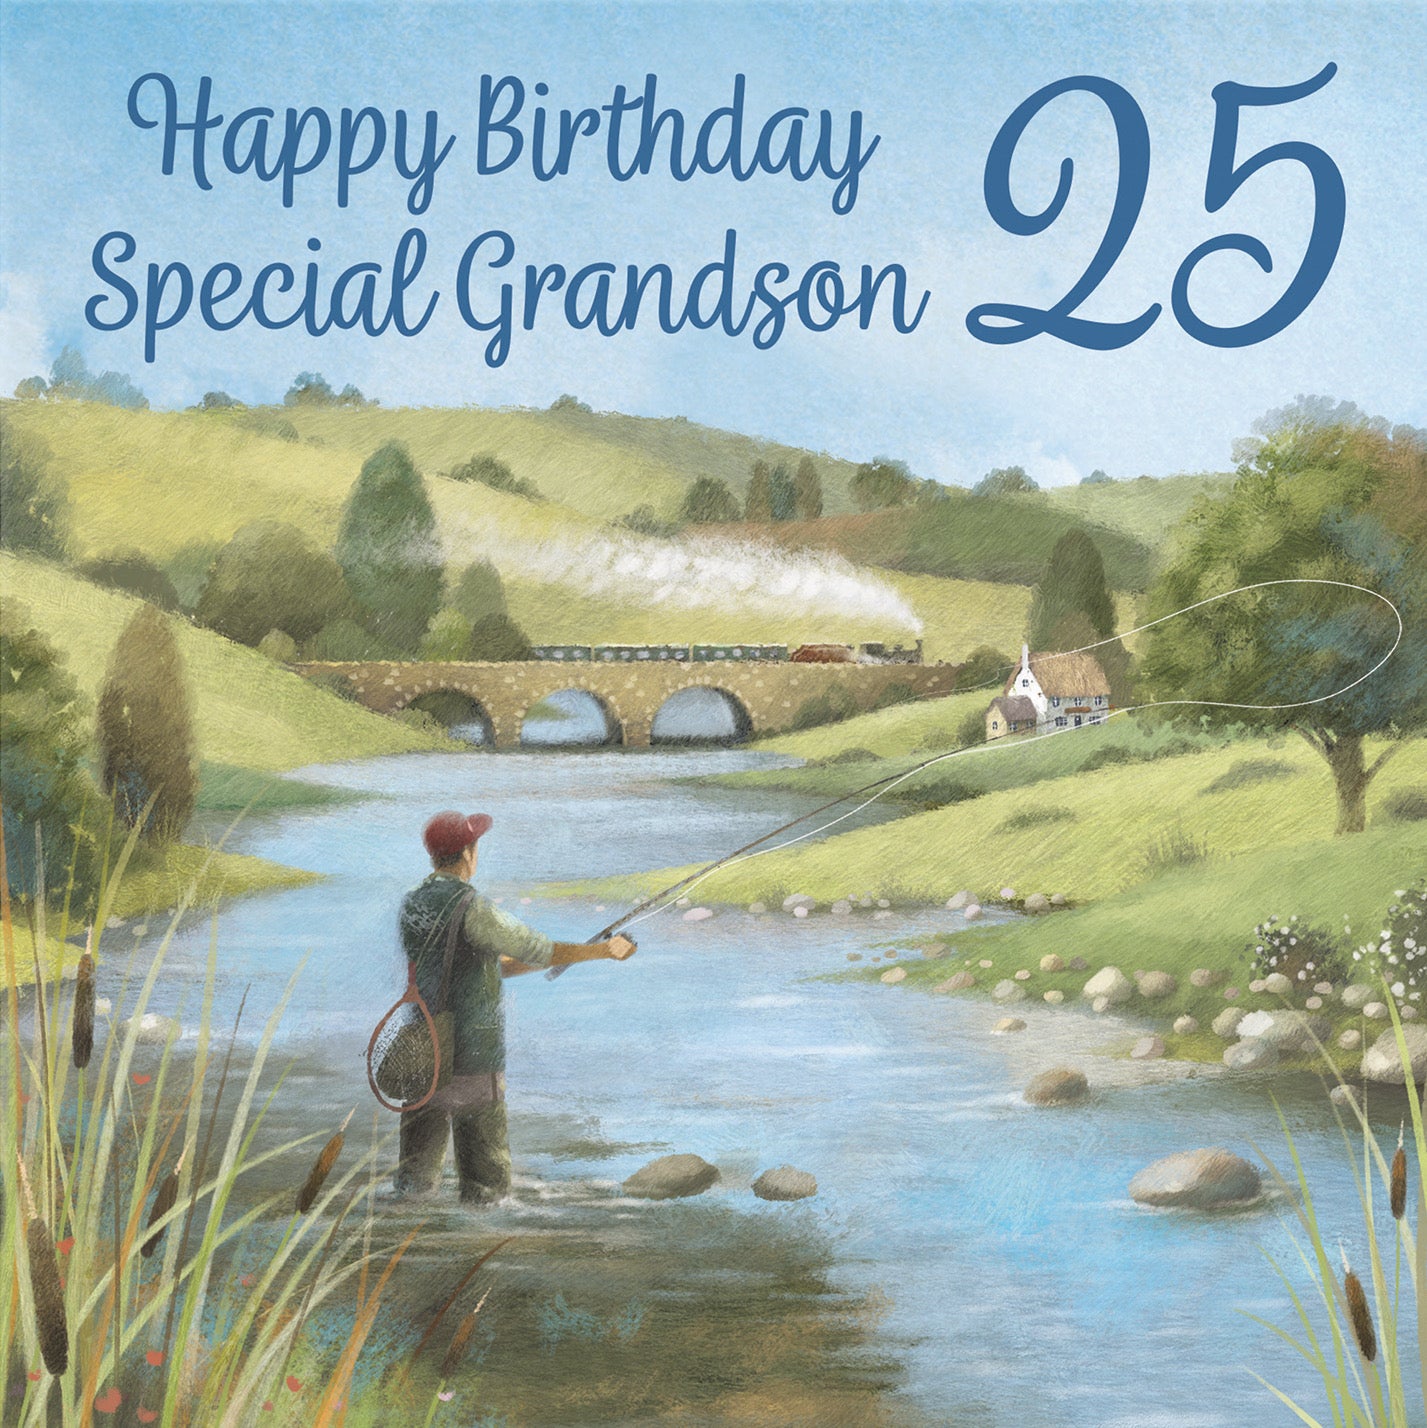 25th Grandson Fly Fishing Birthday Card Milo's Gallery - Default Title (B0CQWST1PW)